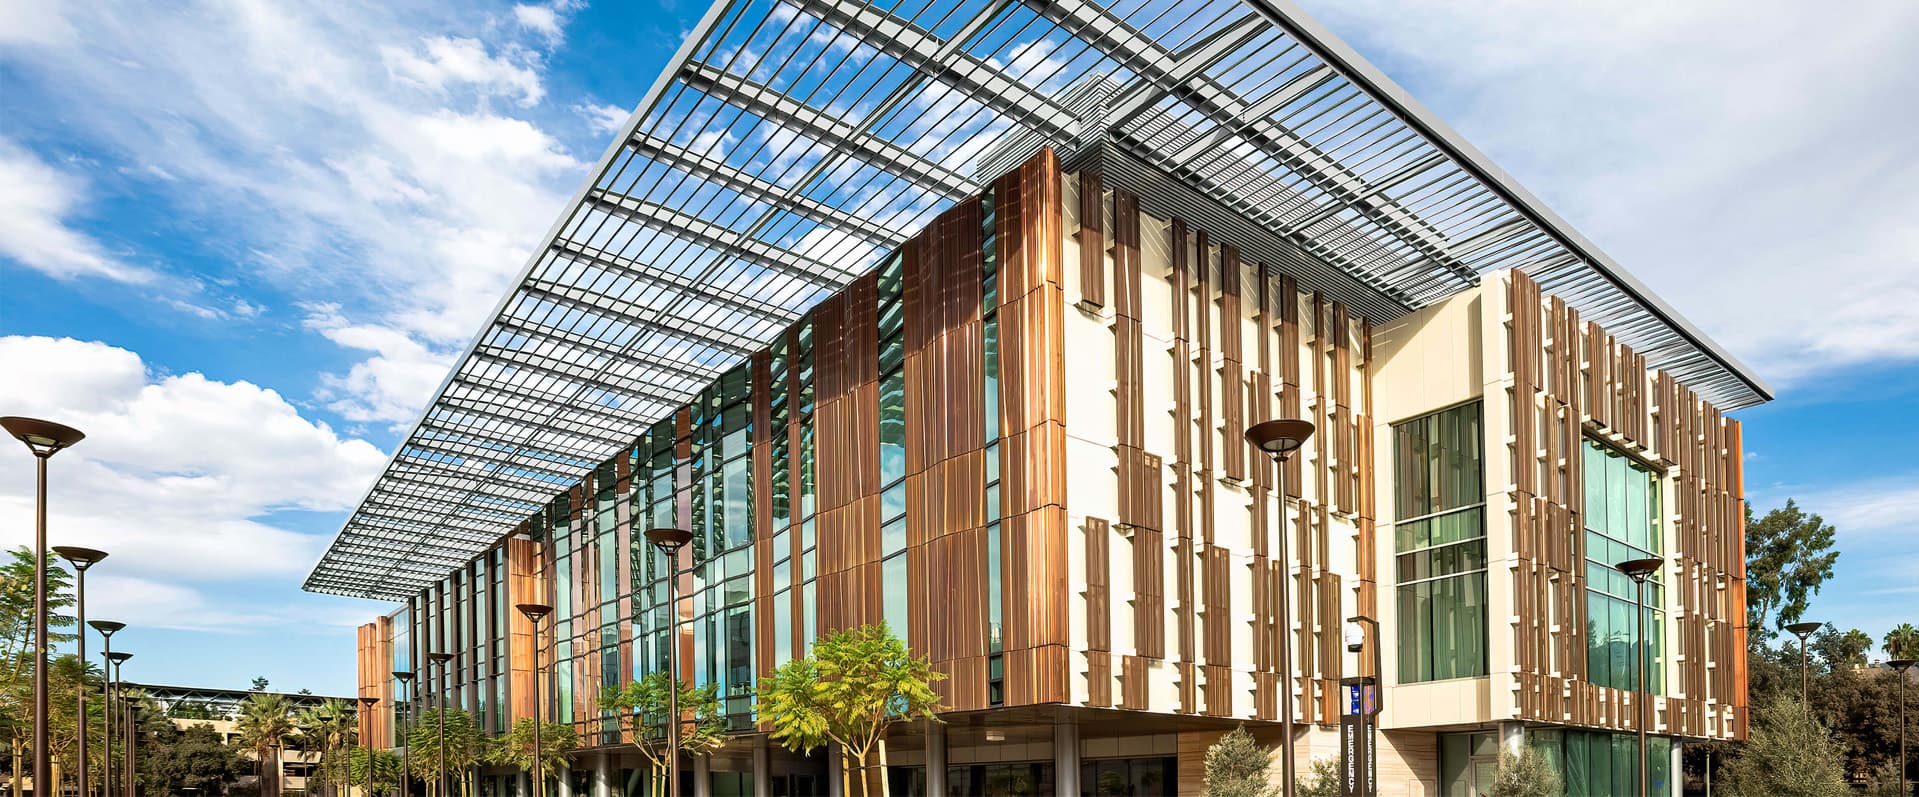 Endurance, Change and Vision: The Caltech Chen Neuroscience Research Building